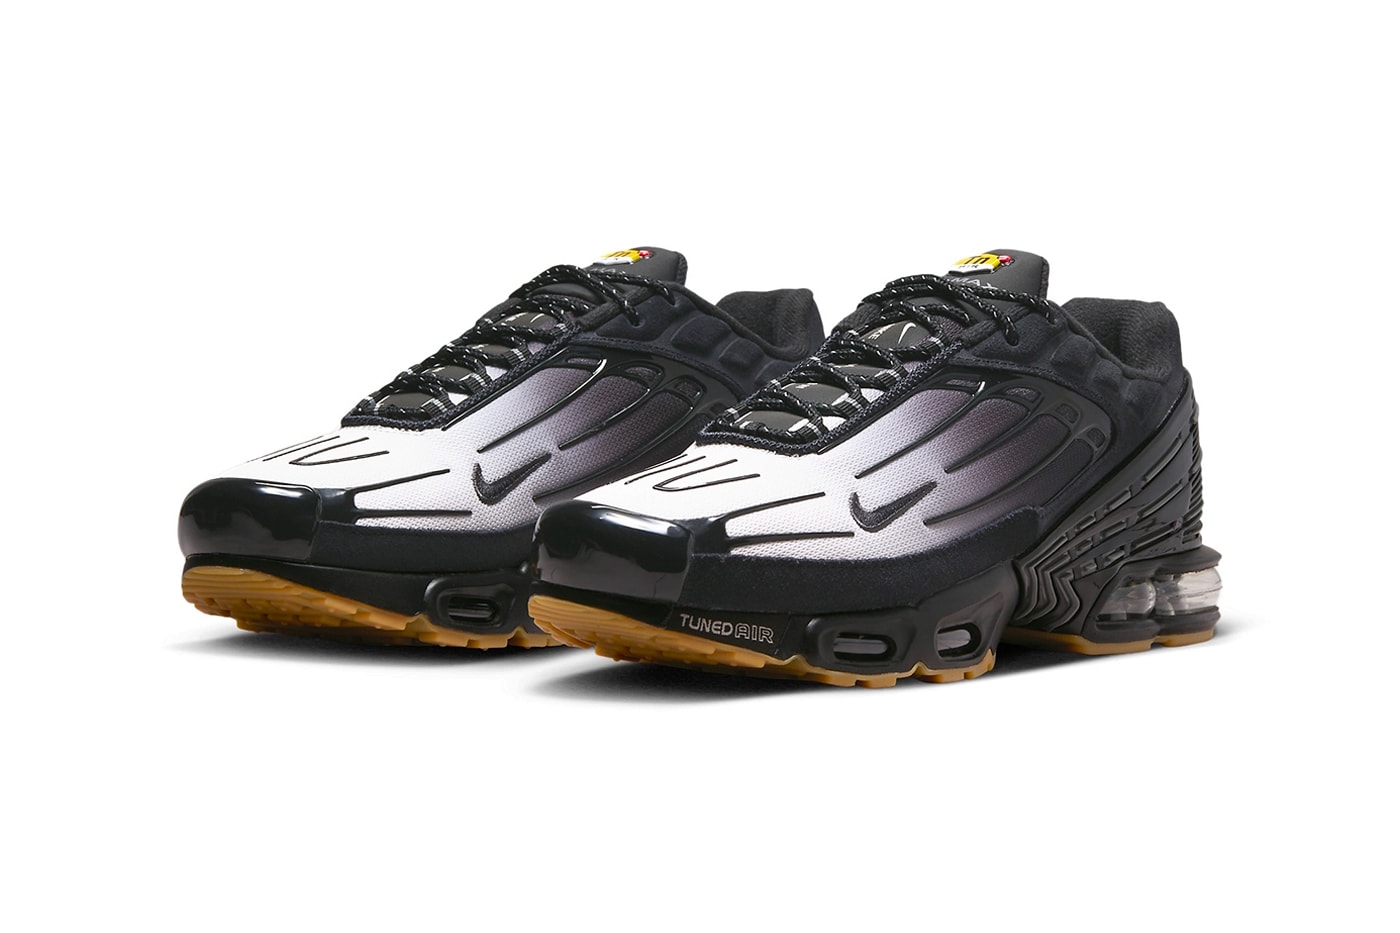 Nike Air Max Plus 3 Surfaces in "Black/Gum" FV0386-001 swoosh technical shoe greyscale upper ombre hues dark black comfort tuned air